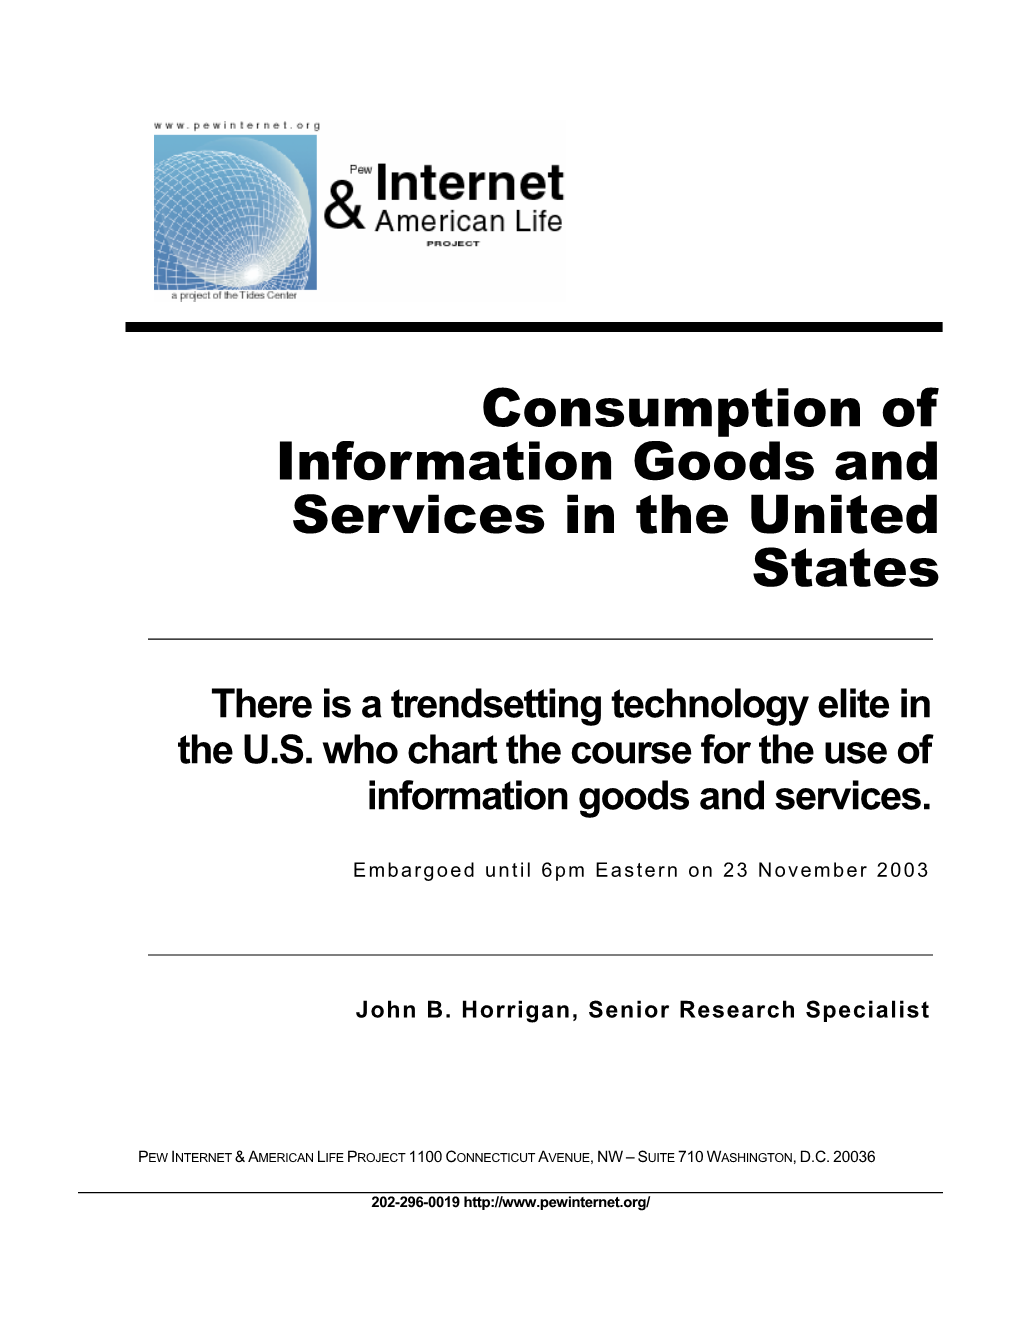 Consumption of Information Goods and Services in the United States